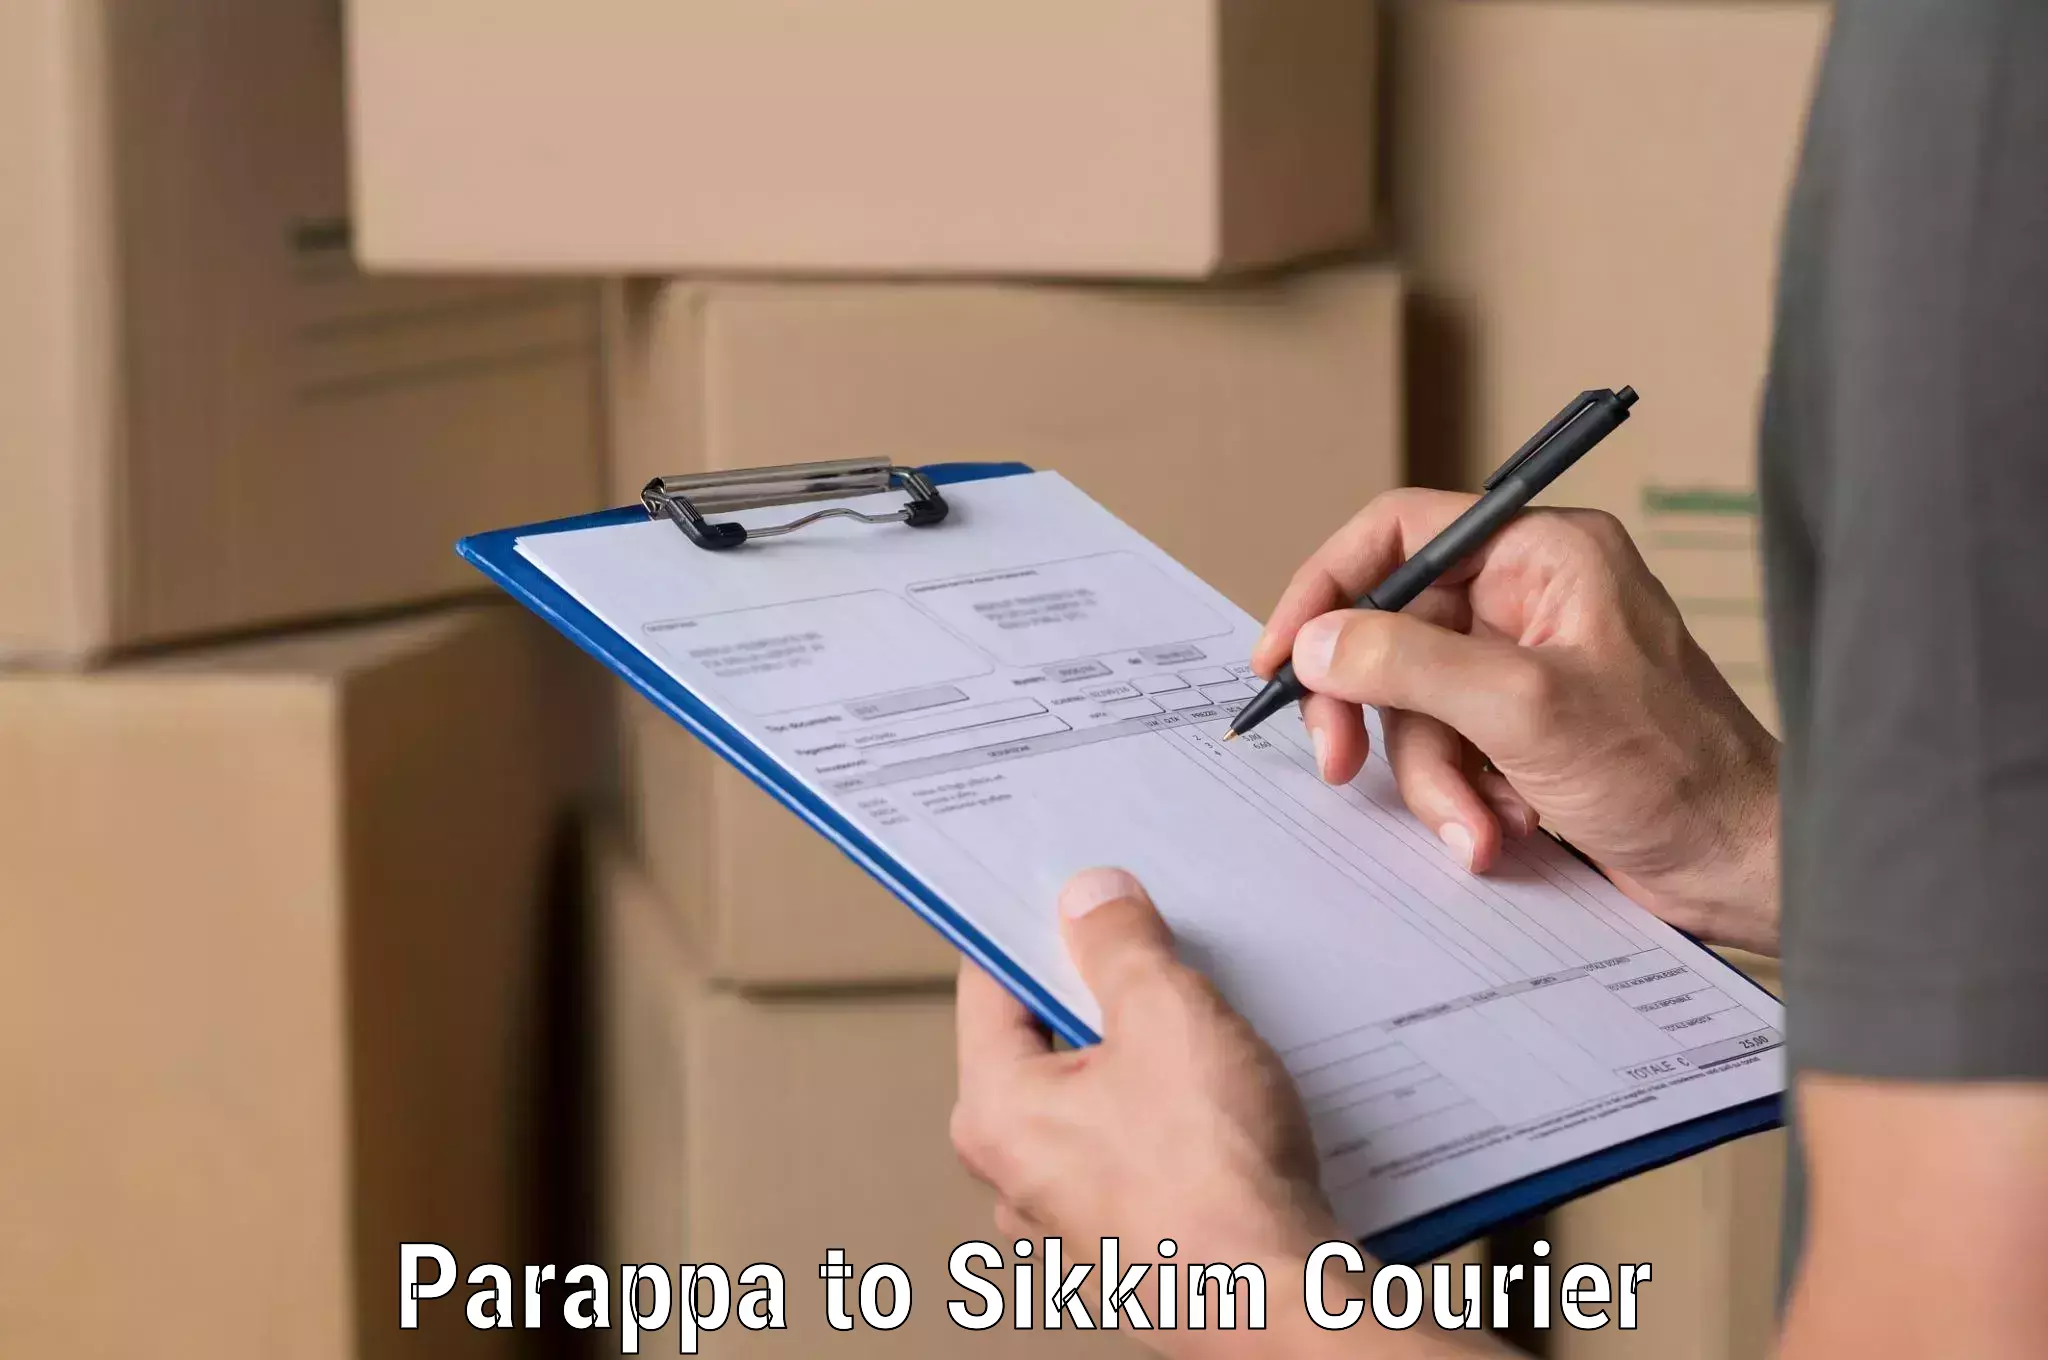 Urgent courier needs Parappa to Pelling